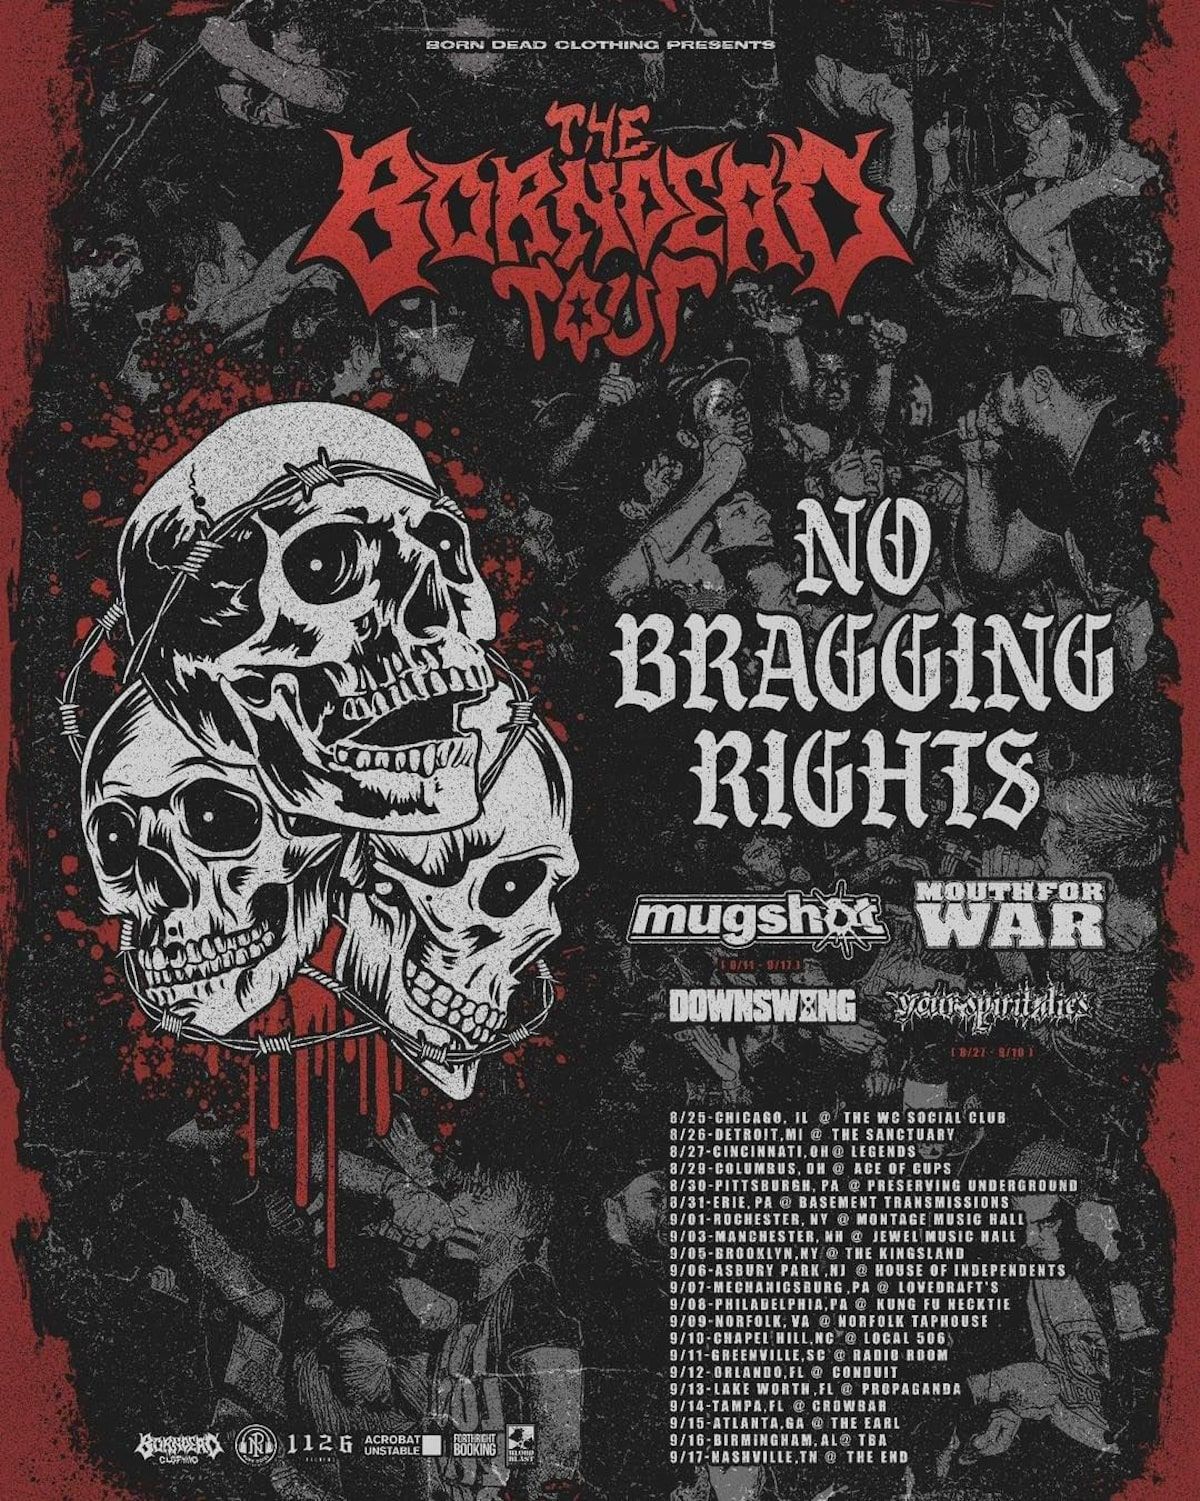 Mouth for War tour dates